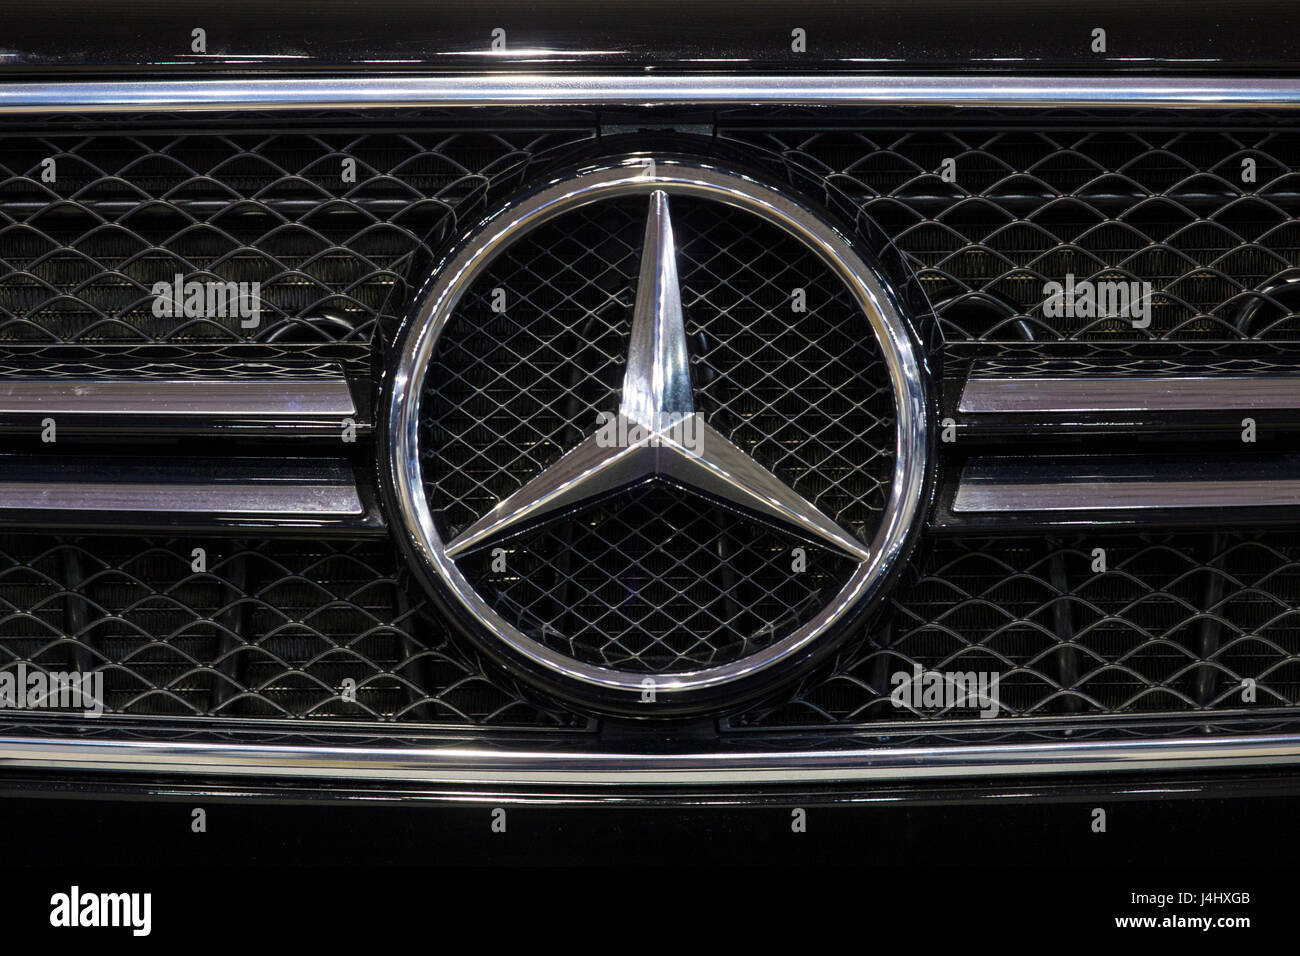 BELGRADE, SERBIA - MARCH 28, 2017: Detail of the Mercedes car. Company became known as Daimler-Benz AG, later Mercedes-Benz using its trade name. Stock Photo